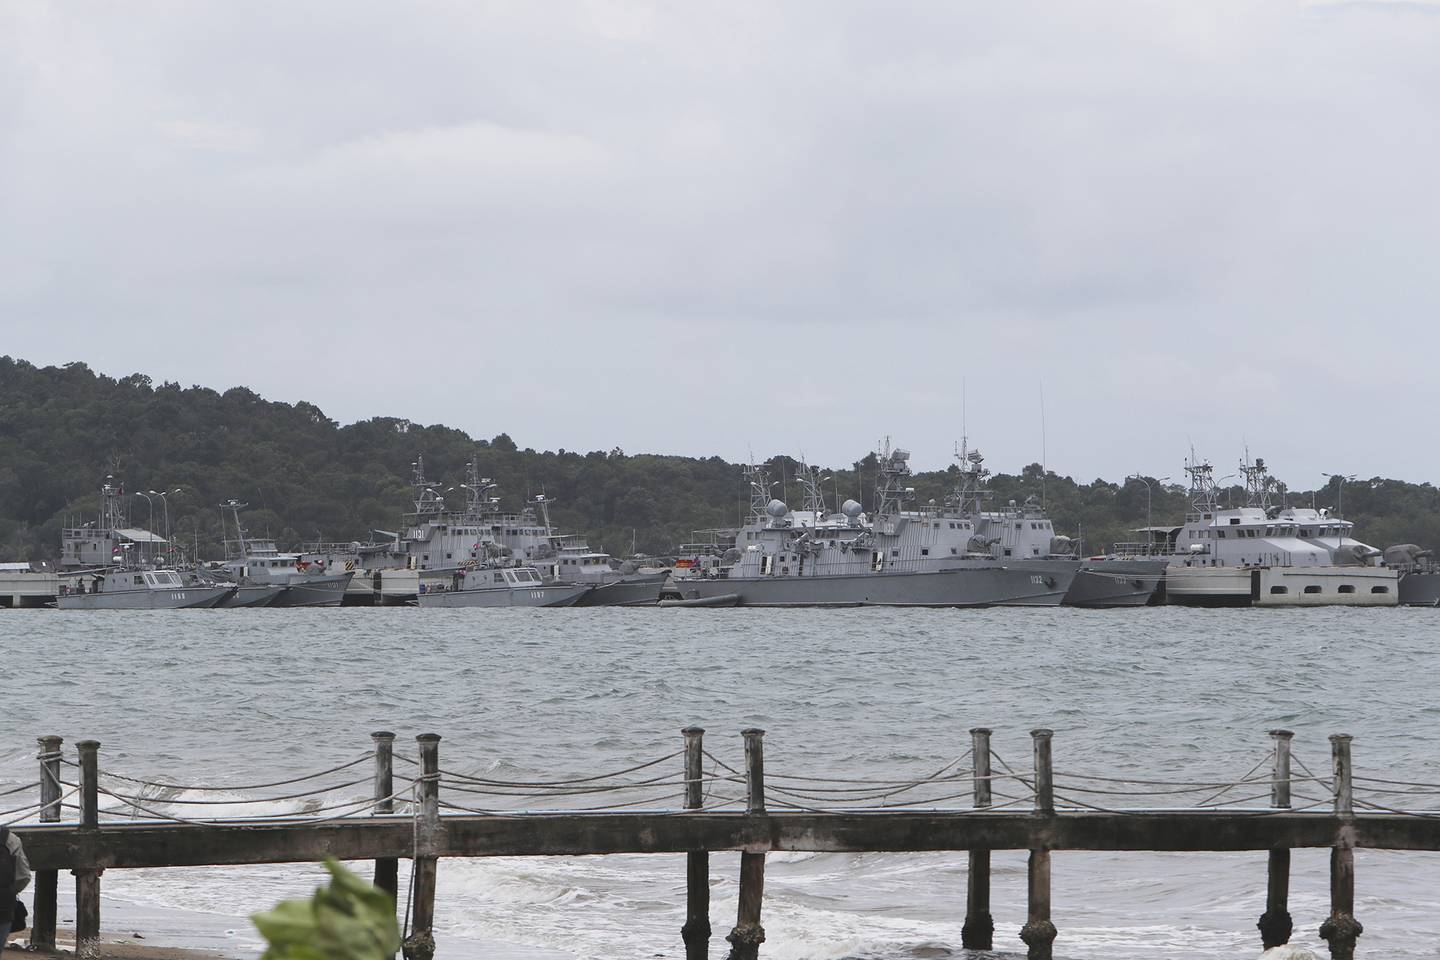 Cambodian warships are docked at Ream Naval Base in Sihanoukville, Cambodia, on July 26, 2019.